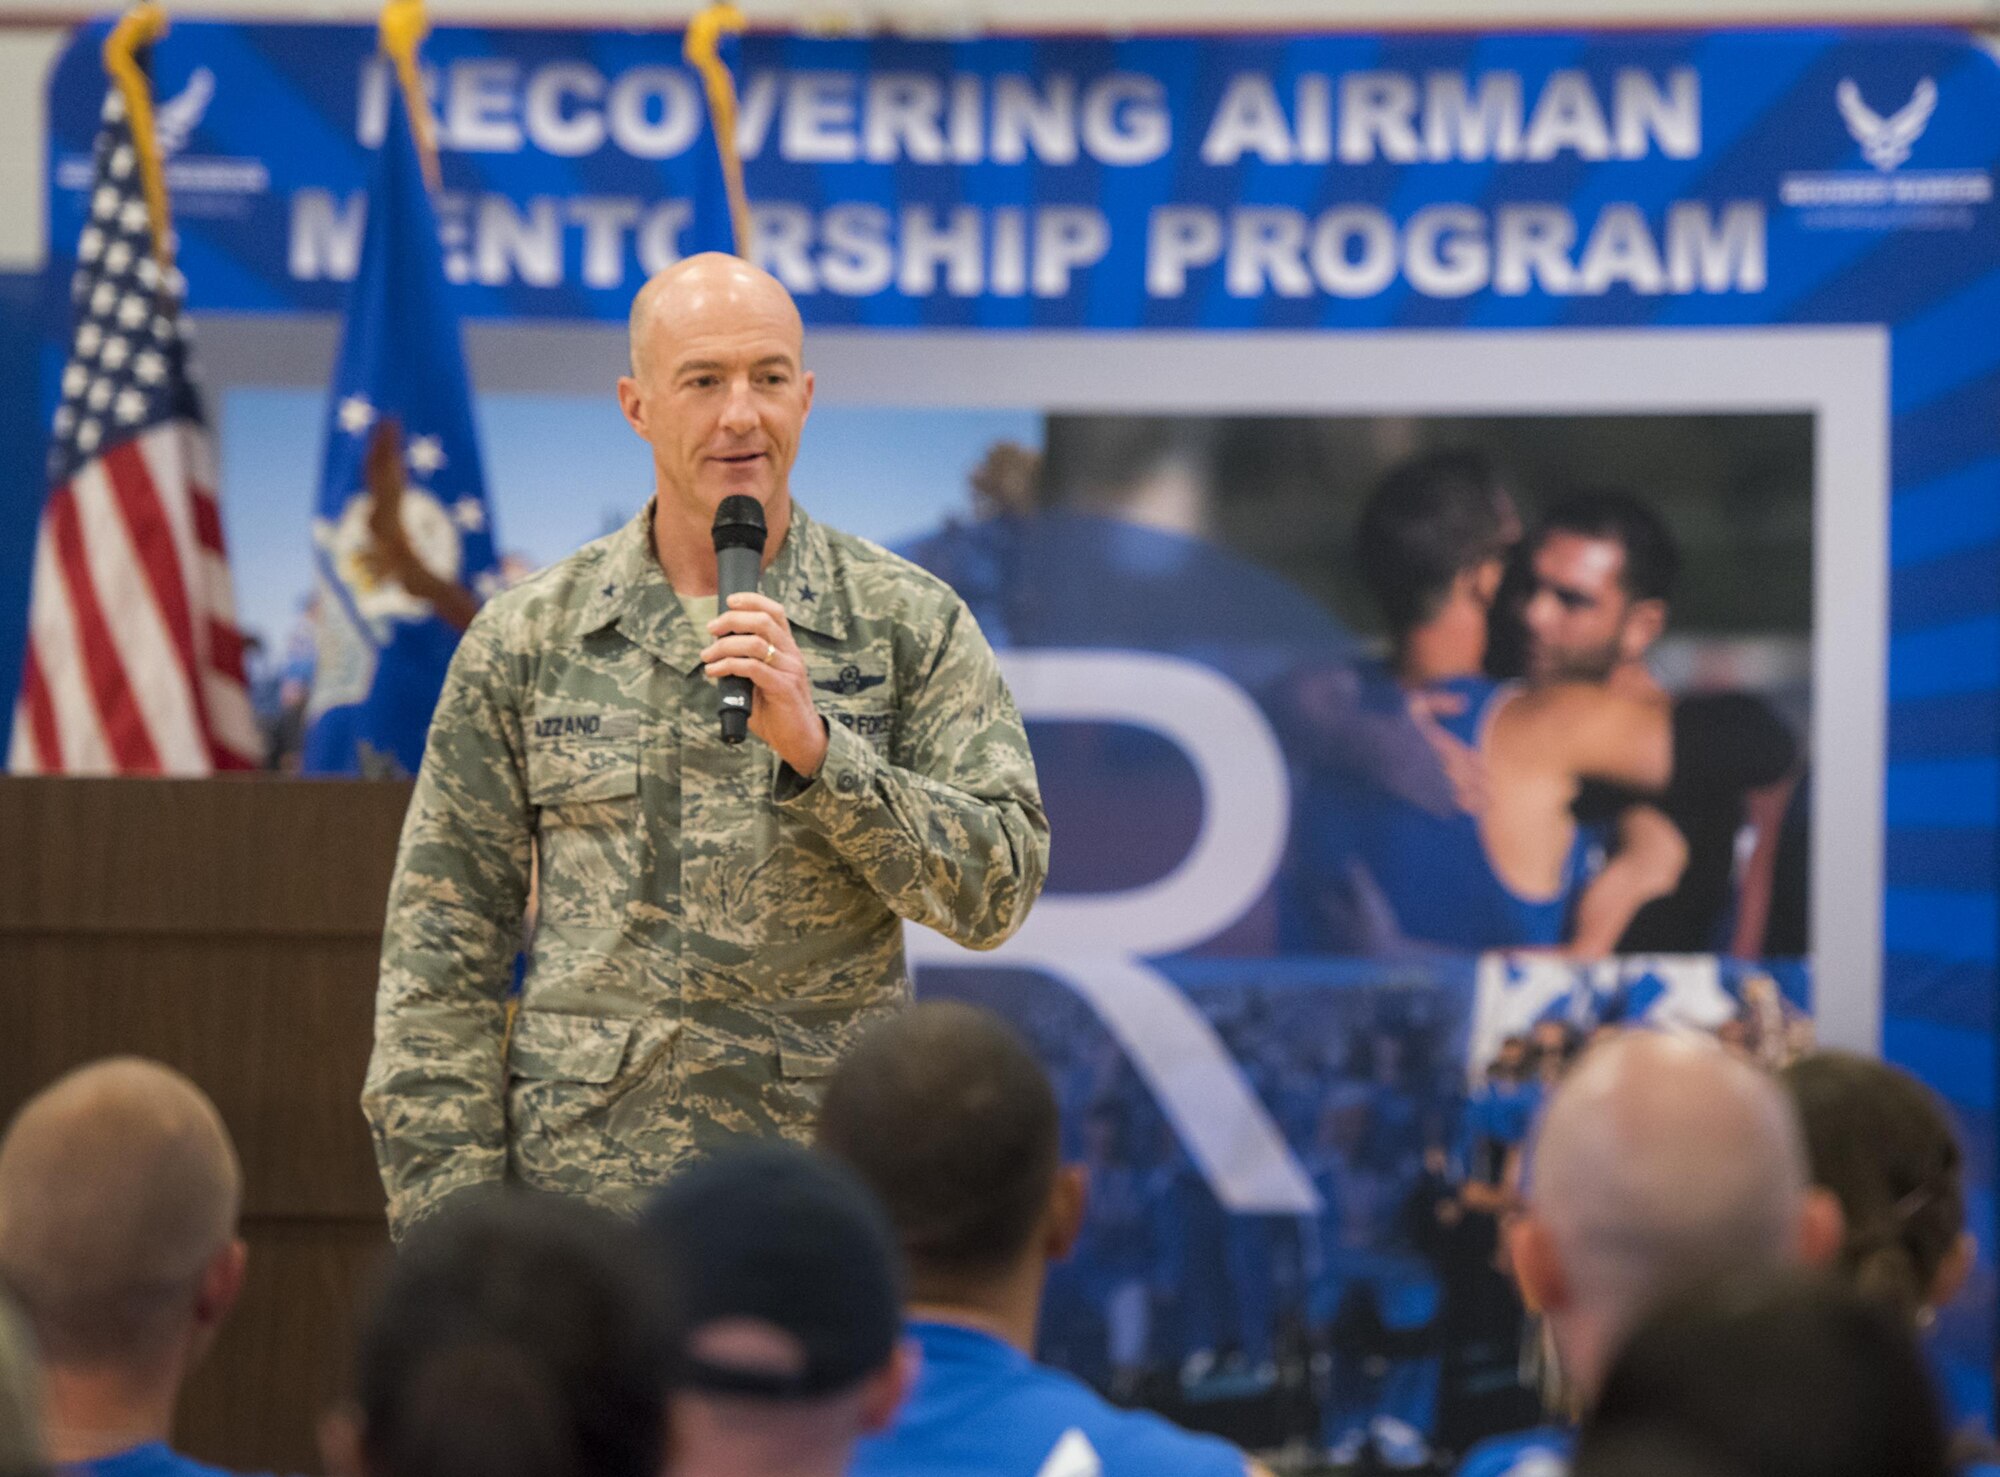 Brig. Gen. Christopher Azzano, the 96th Test Wing commander, speaks to the Warrior CARE attendees and Warrior Games athletes at the opening ceremony of the two events April 24 at Eglin Air Force Base, Fla. The ceremony kicked off a week-long rehabilitative wounded warrior camp as well as a training session for the Air Force Warrior Games athletes. (U.S. Air Force photo/Samuel King Jr.)